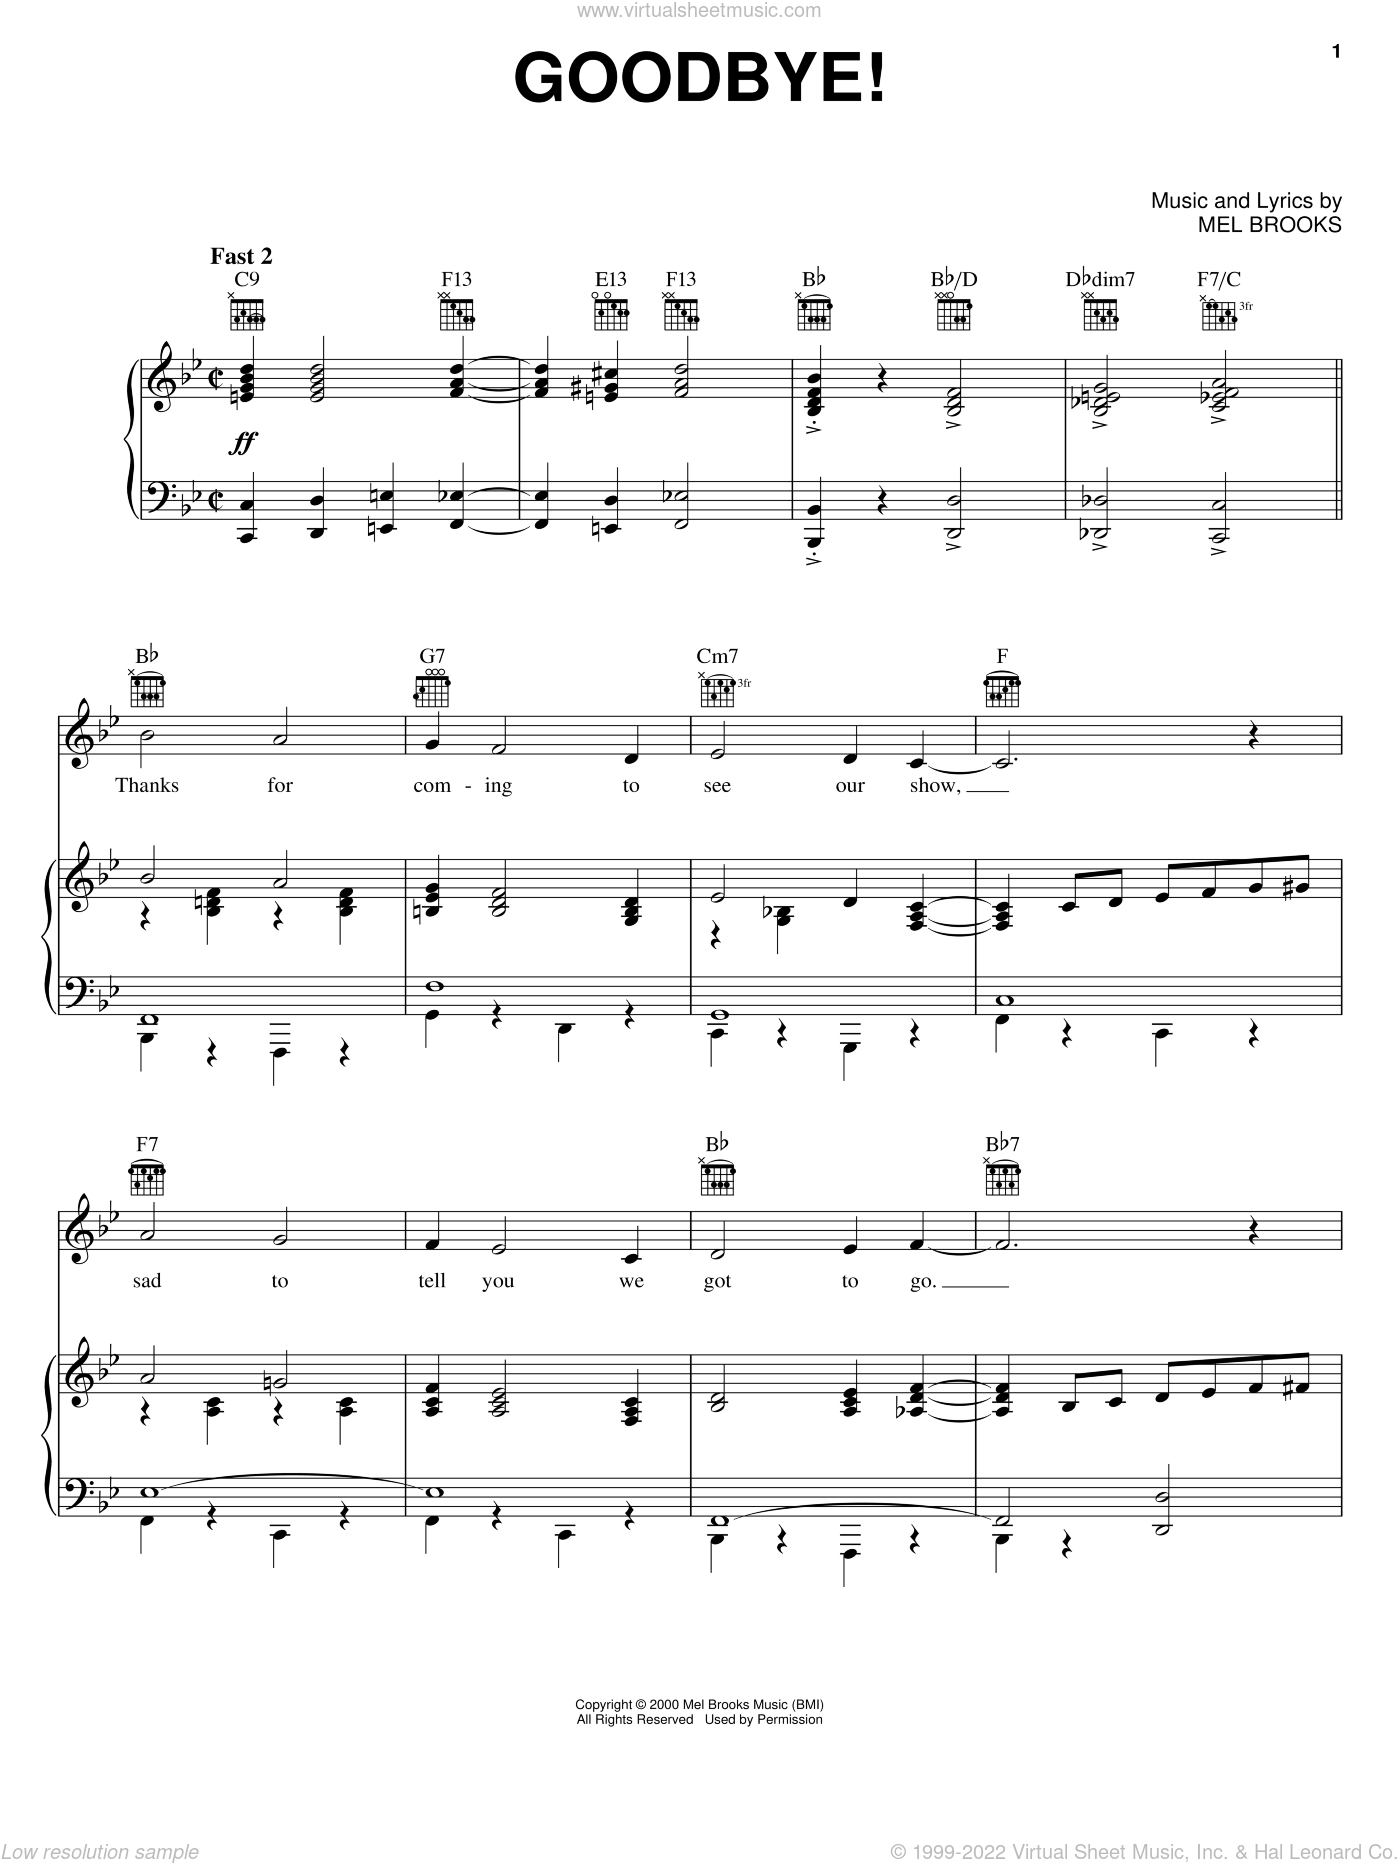 Goodbye! sheet music for voice